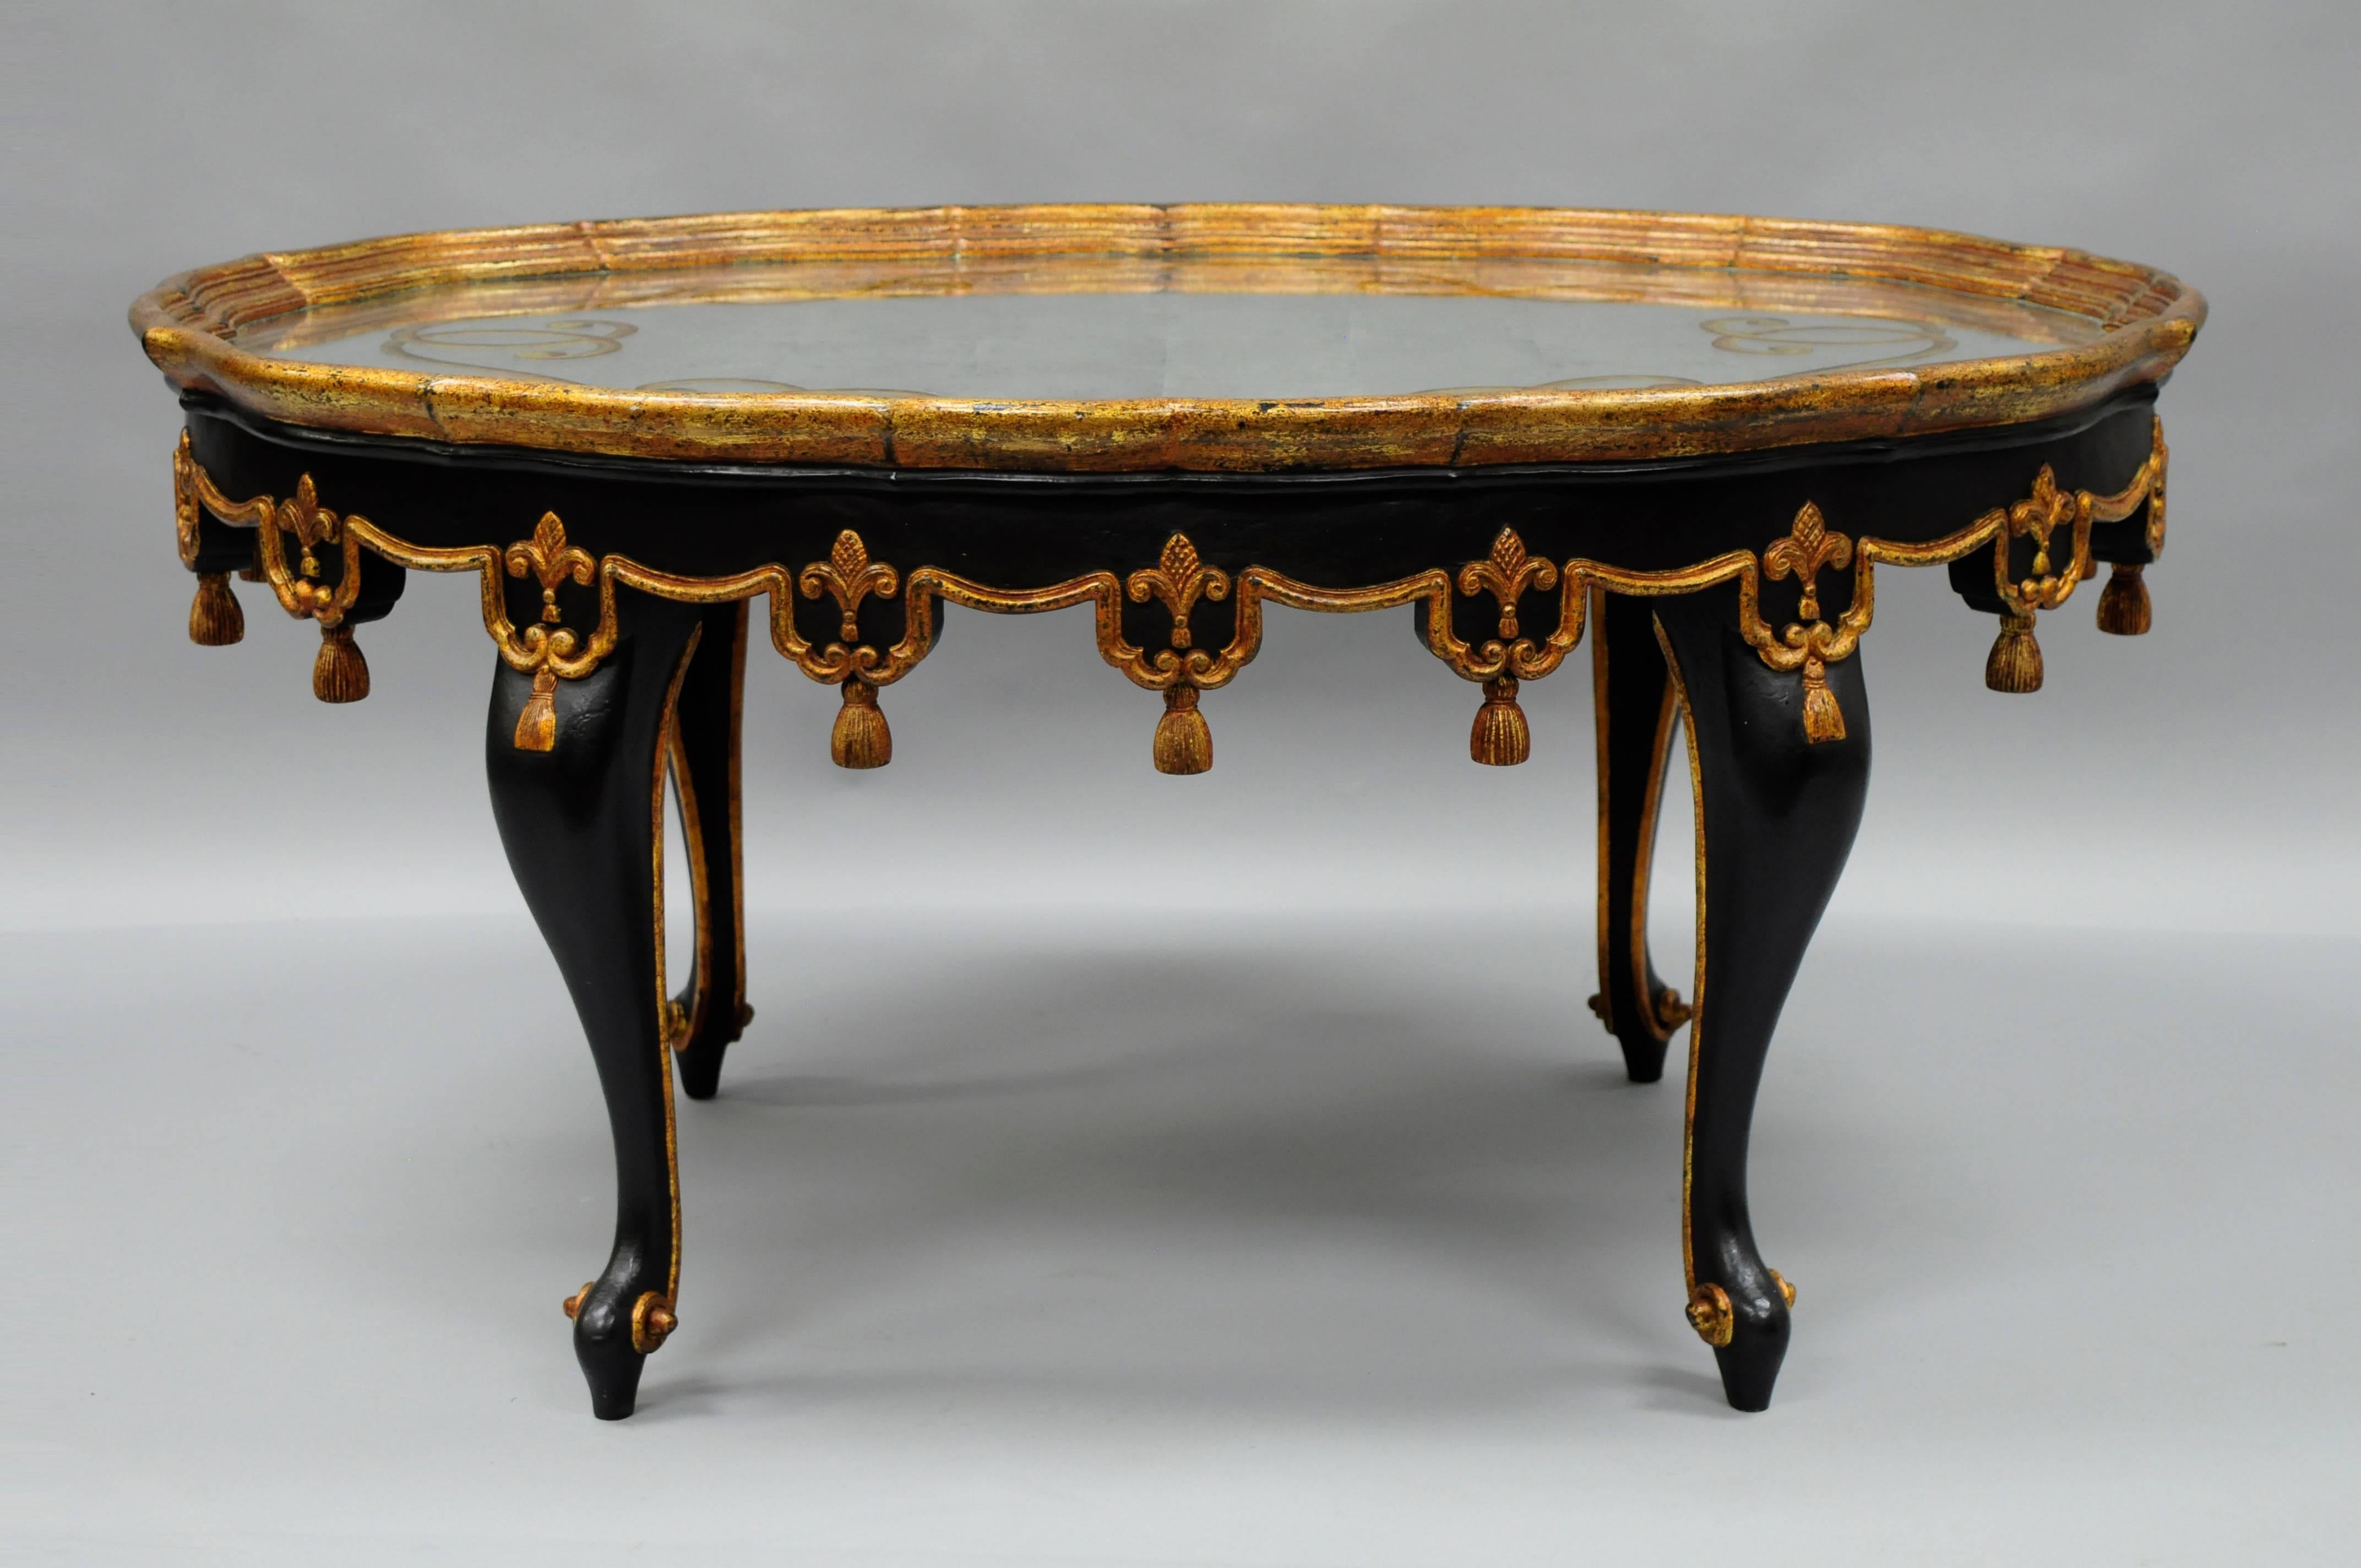 Glass Black & Gold Tassel and Églomisé Mirror Top Coffee Table French Louis XVI Style